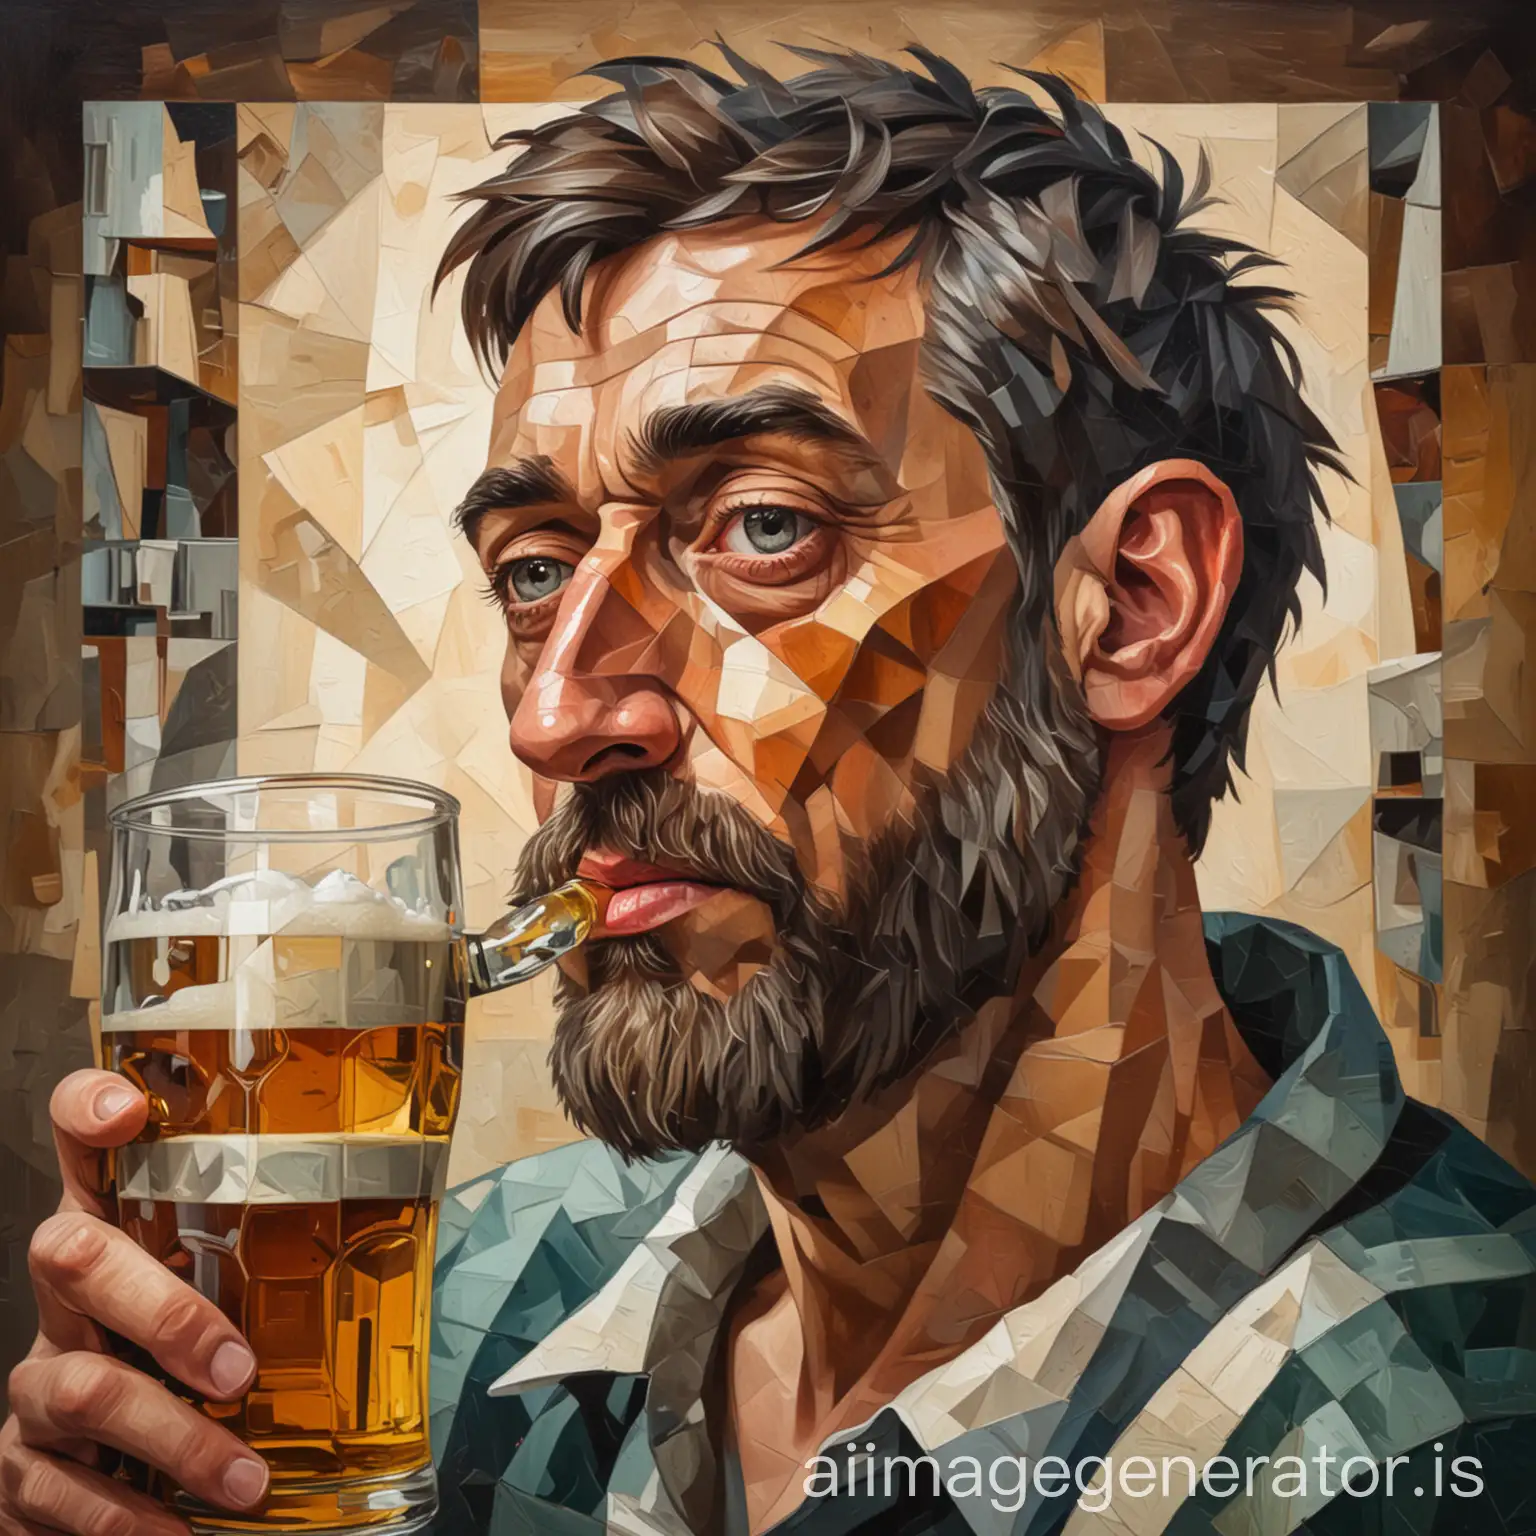 a portrait of someone drinking a beer in a cubism style